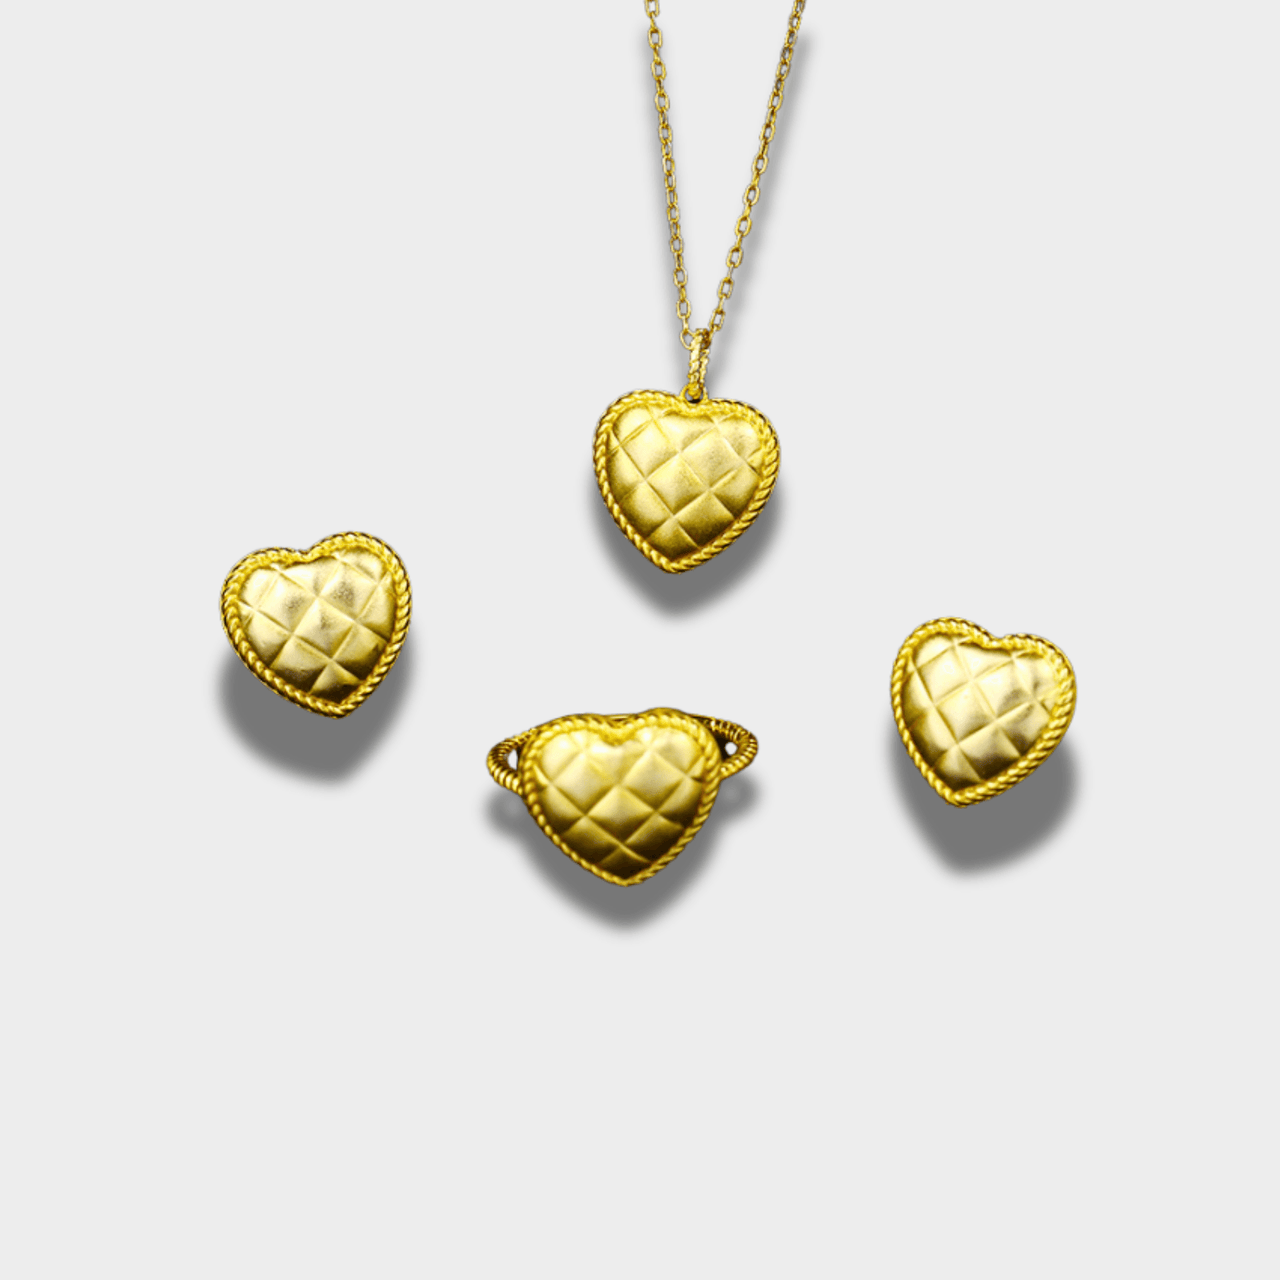 Golden Quilted Heart Silver Necklace and Earrings Set | GottaIce